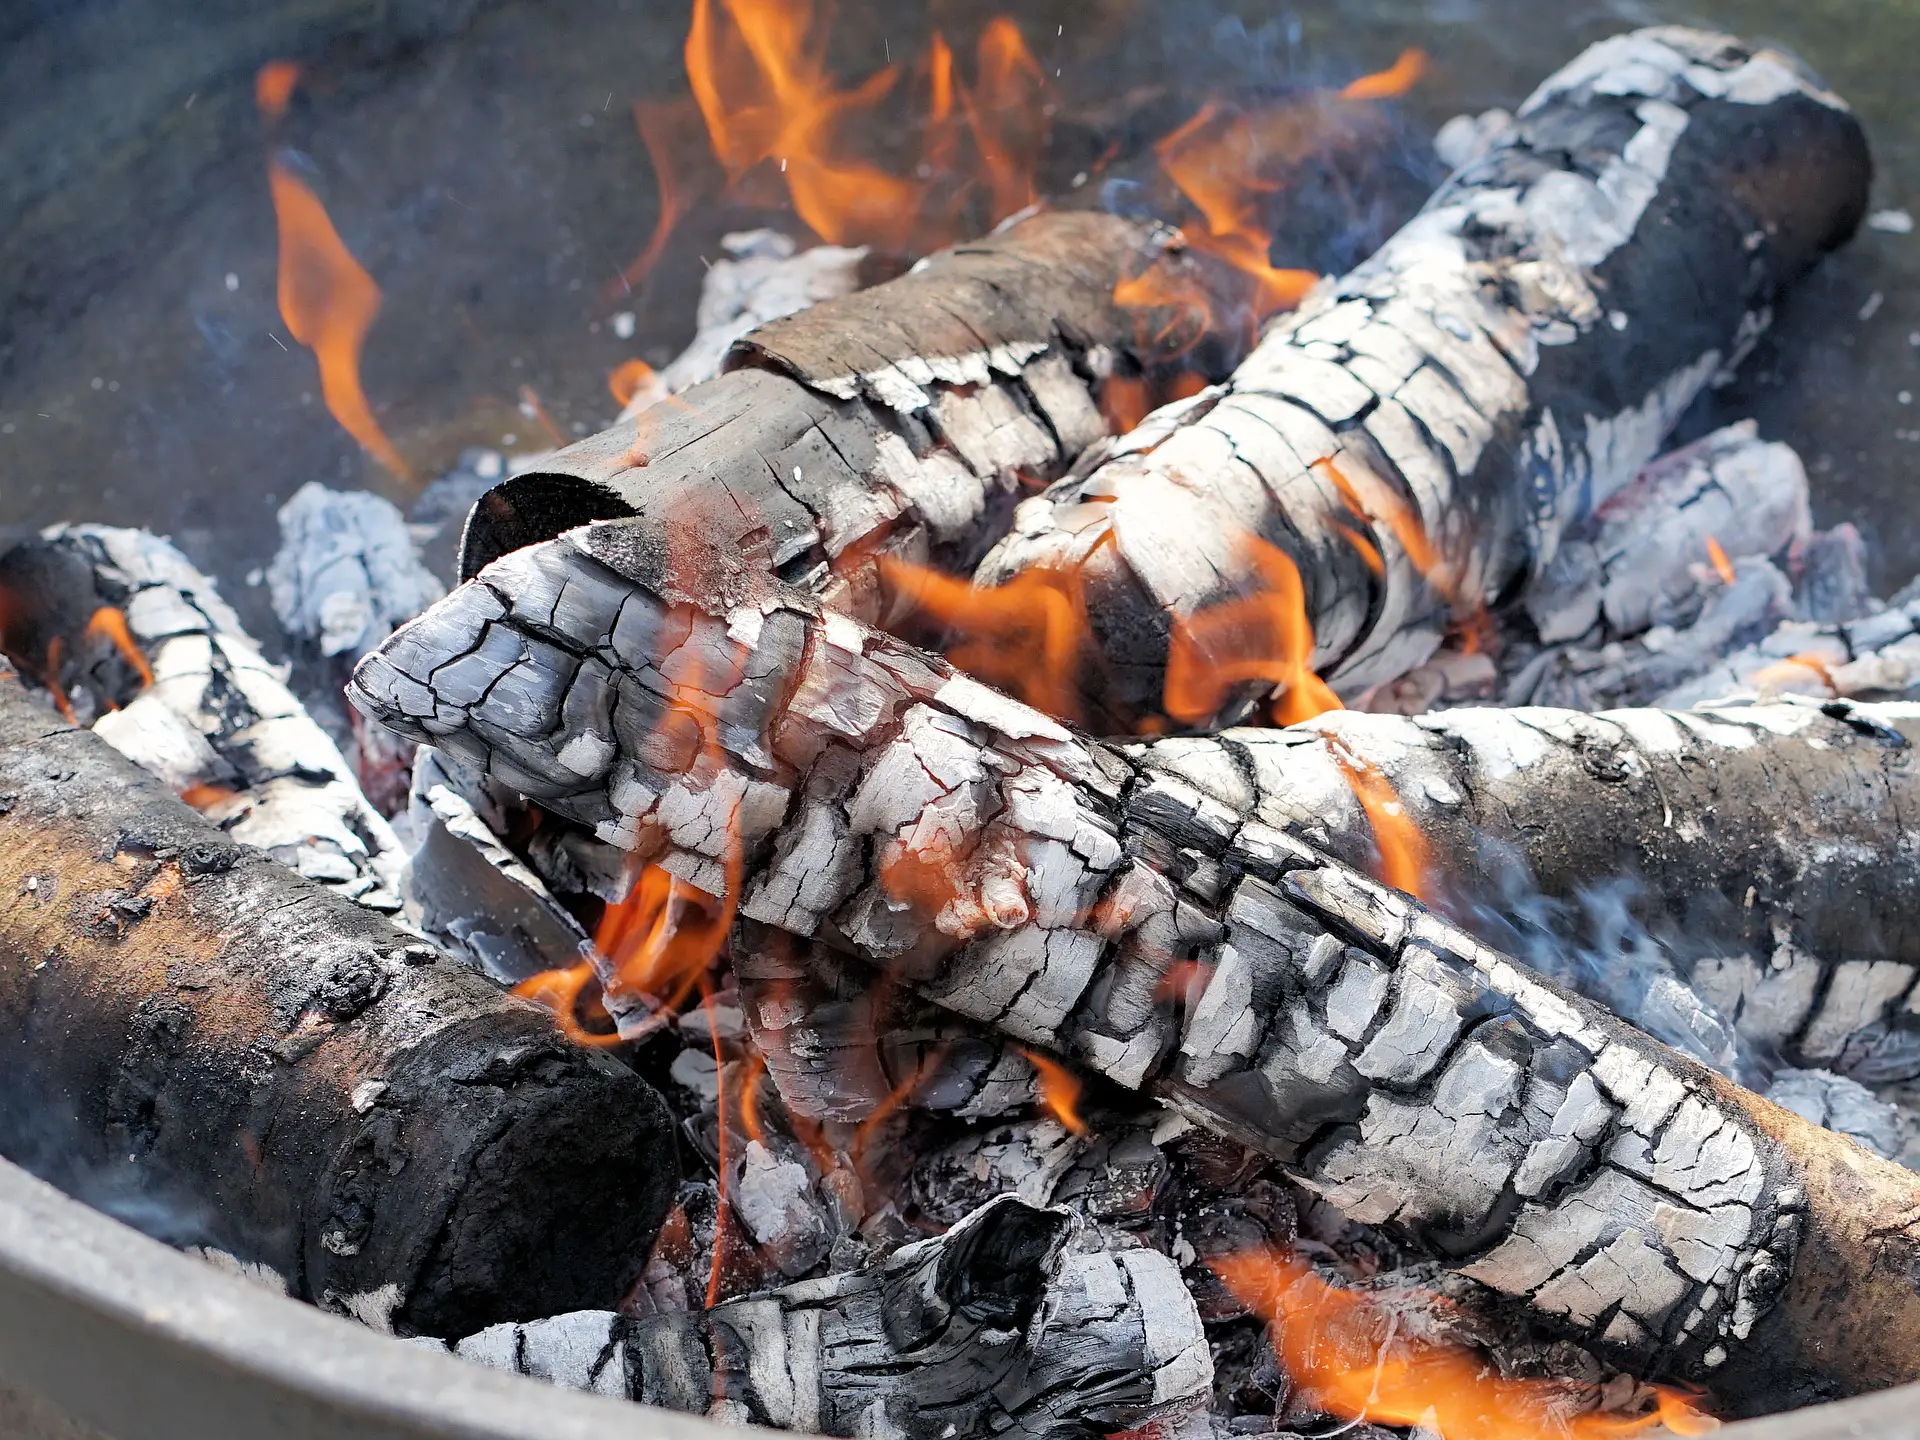 How To Start A Wood Burning Fire Pit, Wood Charcoal Burning Fire Pit